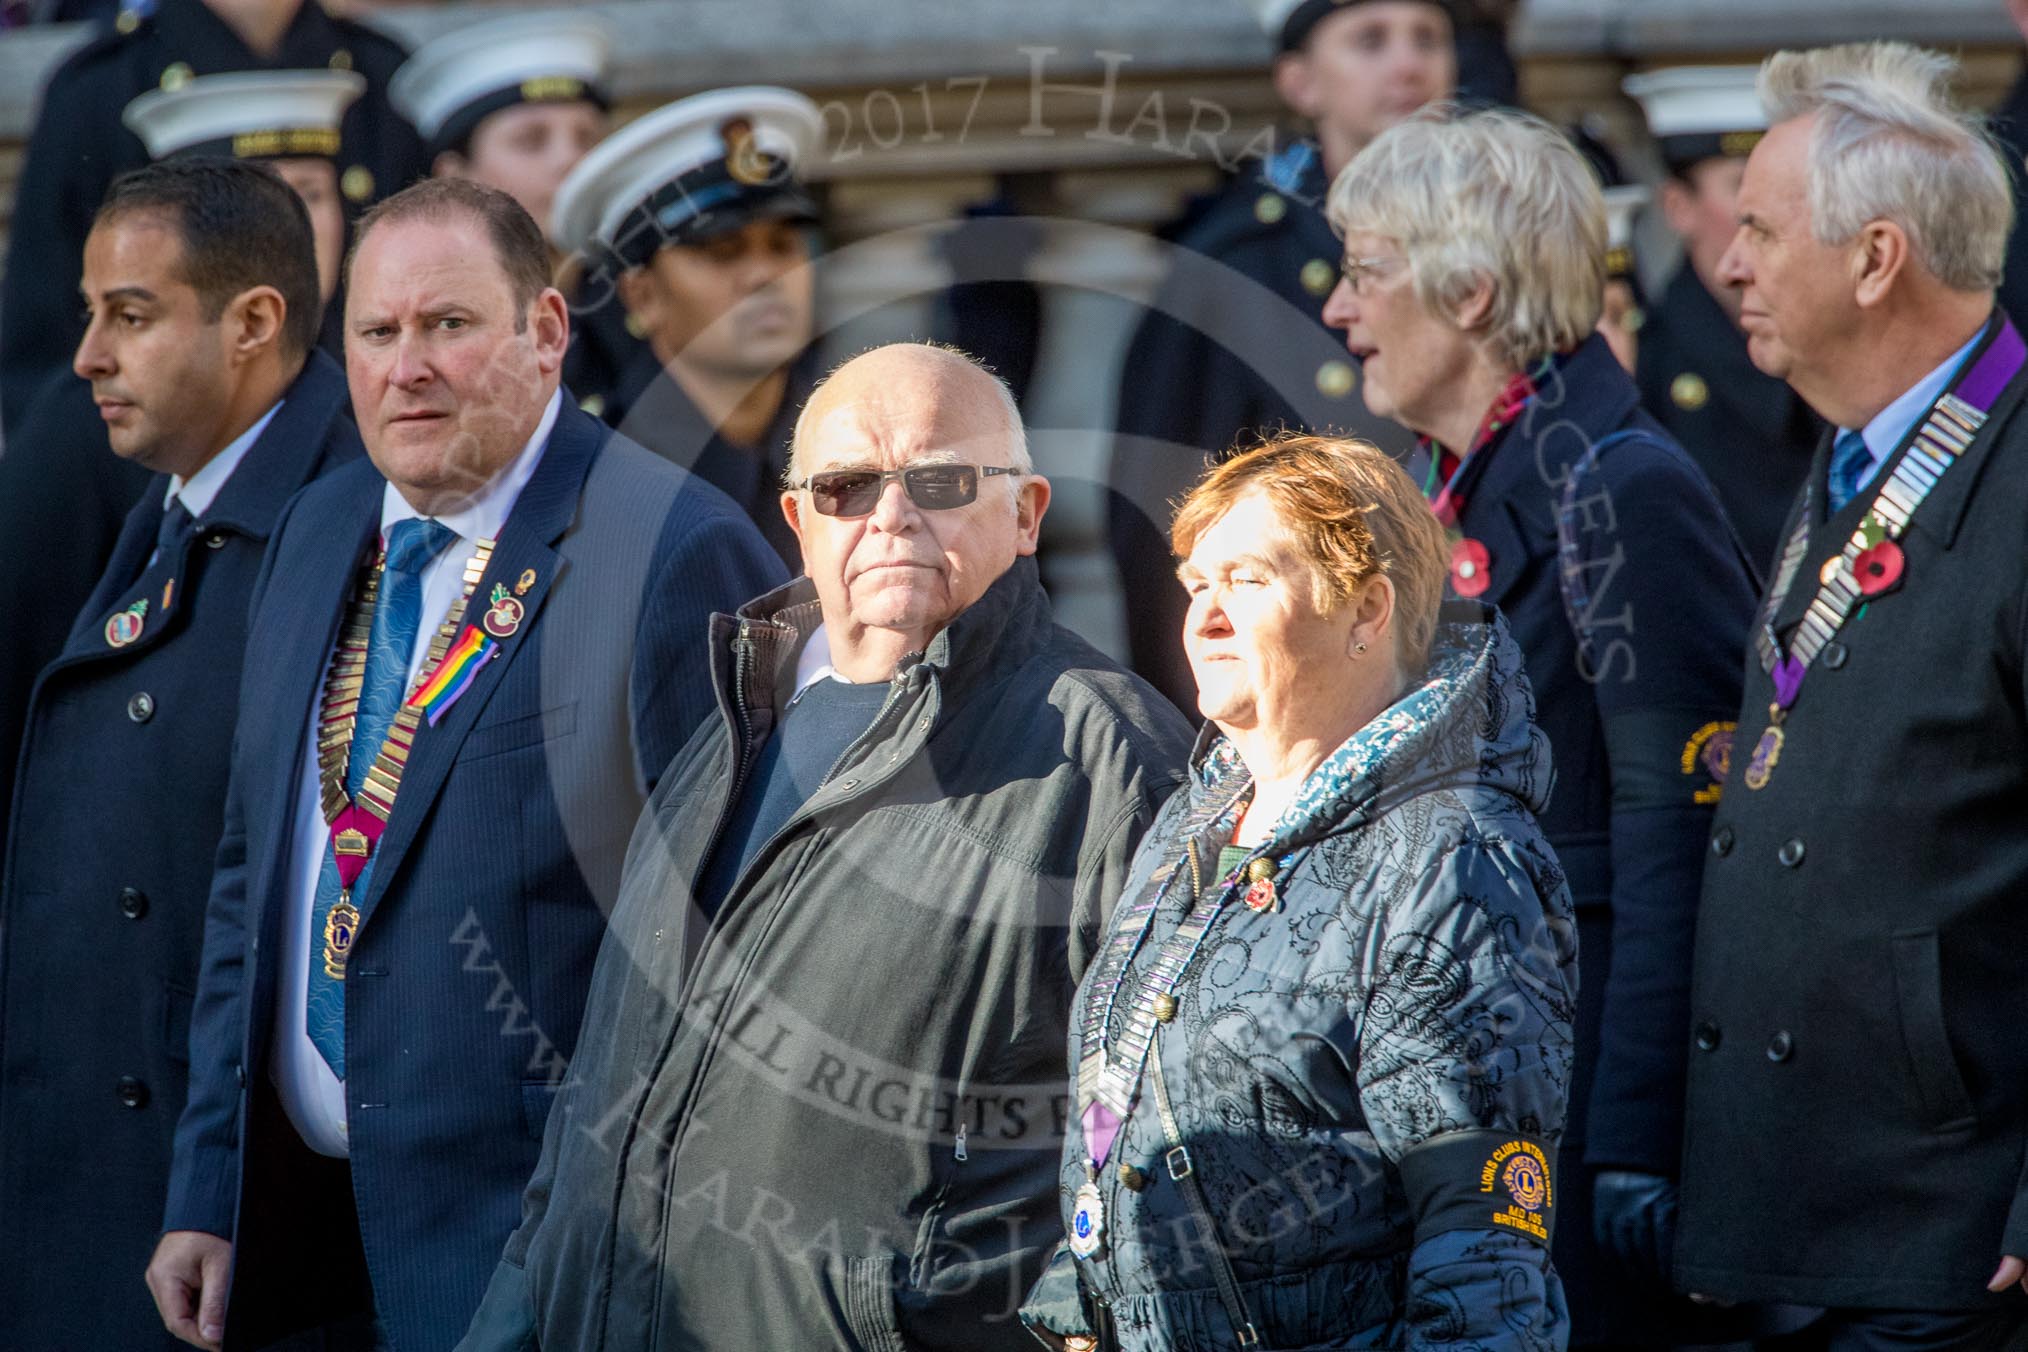 Lions Clubs International (Group M31, 13 members) during the Royal British Legion March Past on Remembrance Sunday at the Cenotaph, Whitehall, Westminster, London, 11 November 2018, 12:28.